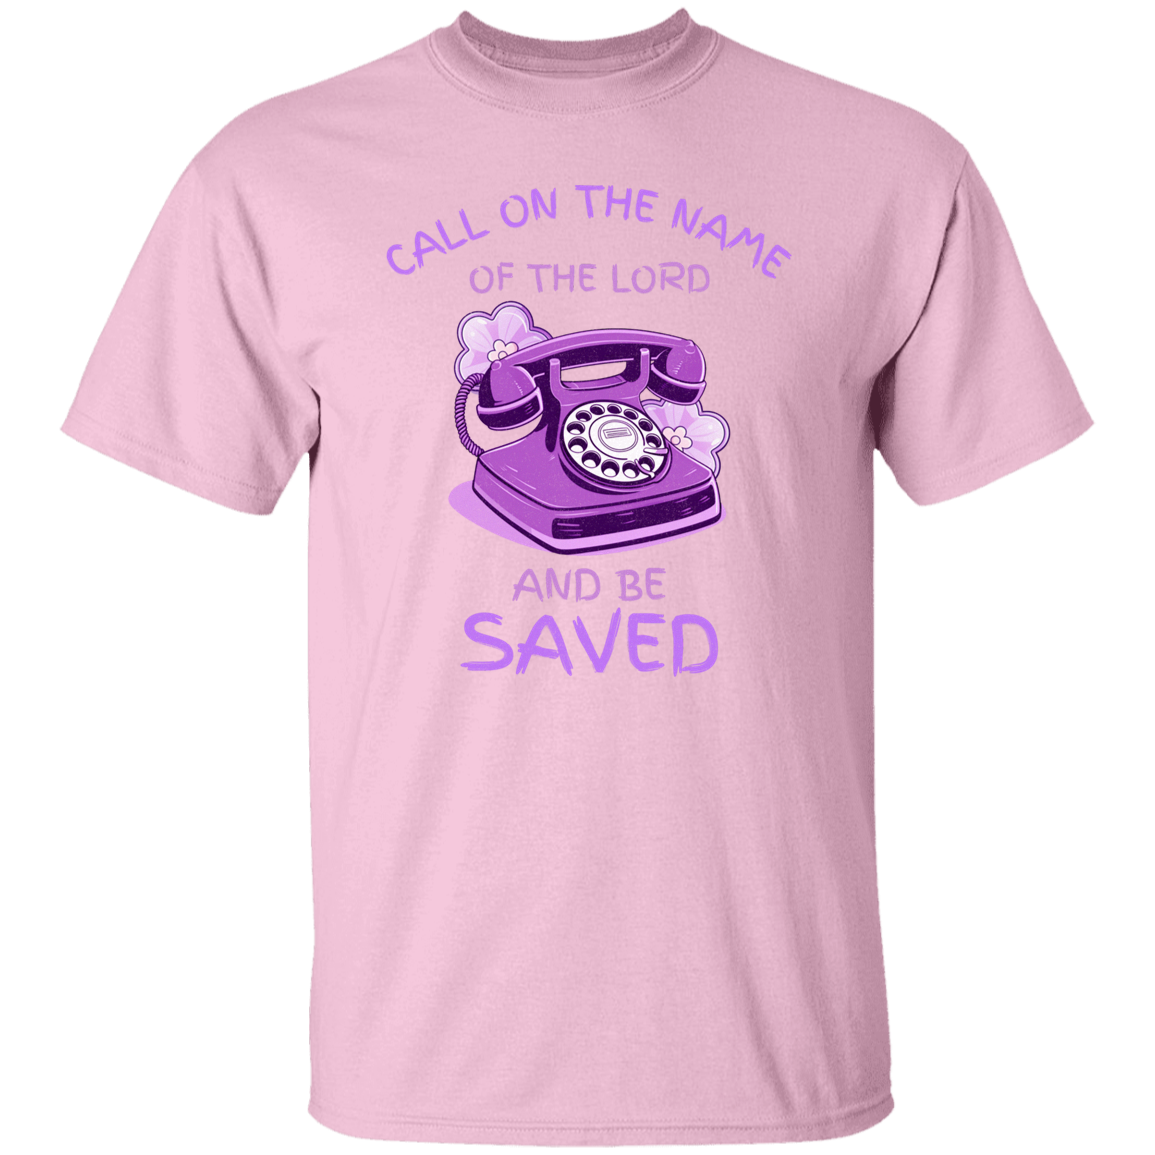 Call On the Name of the Lord T-Shirt